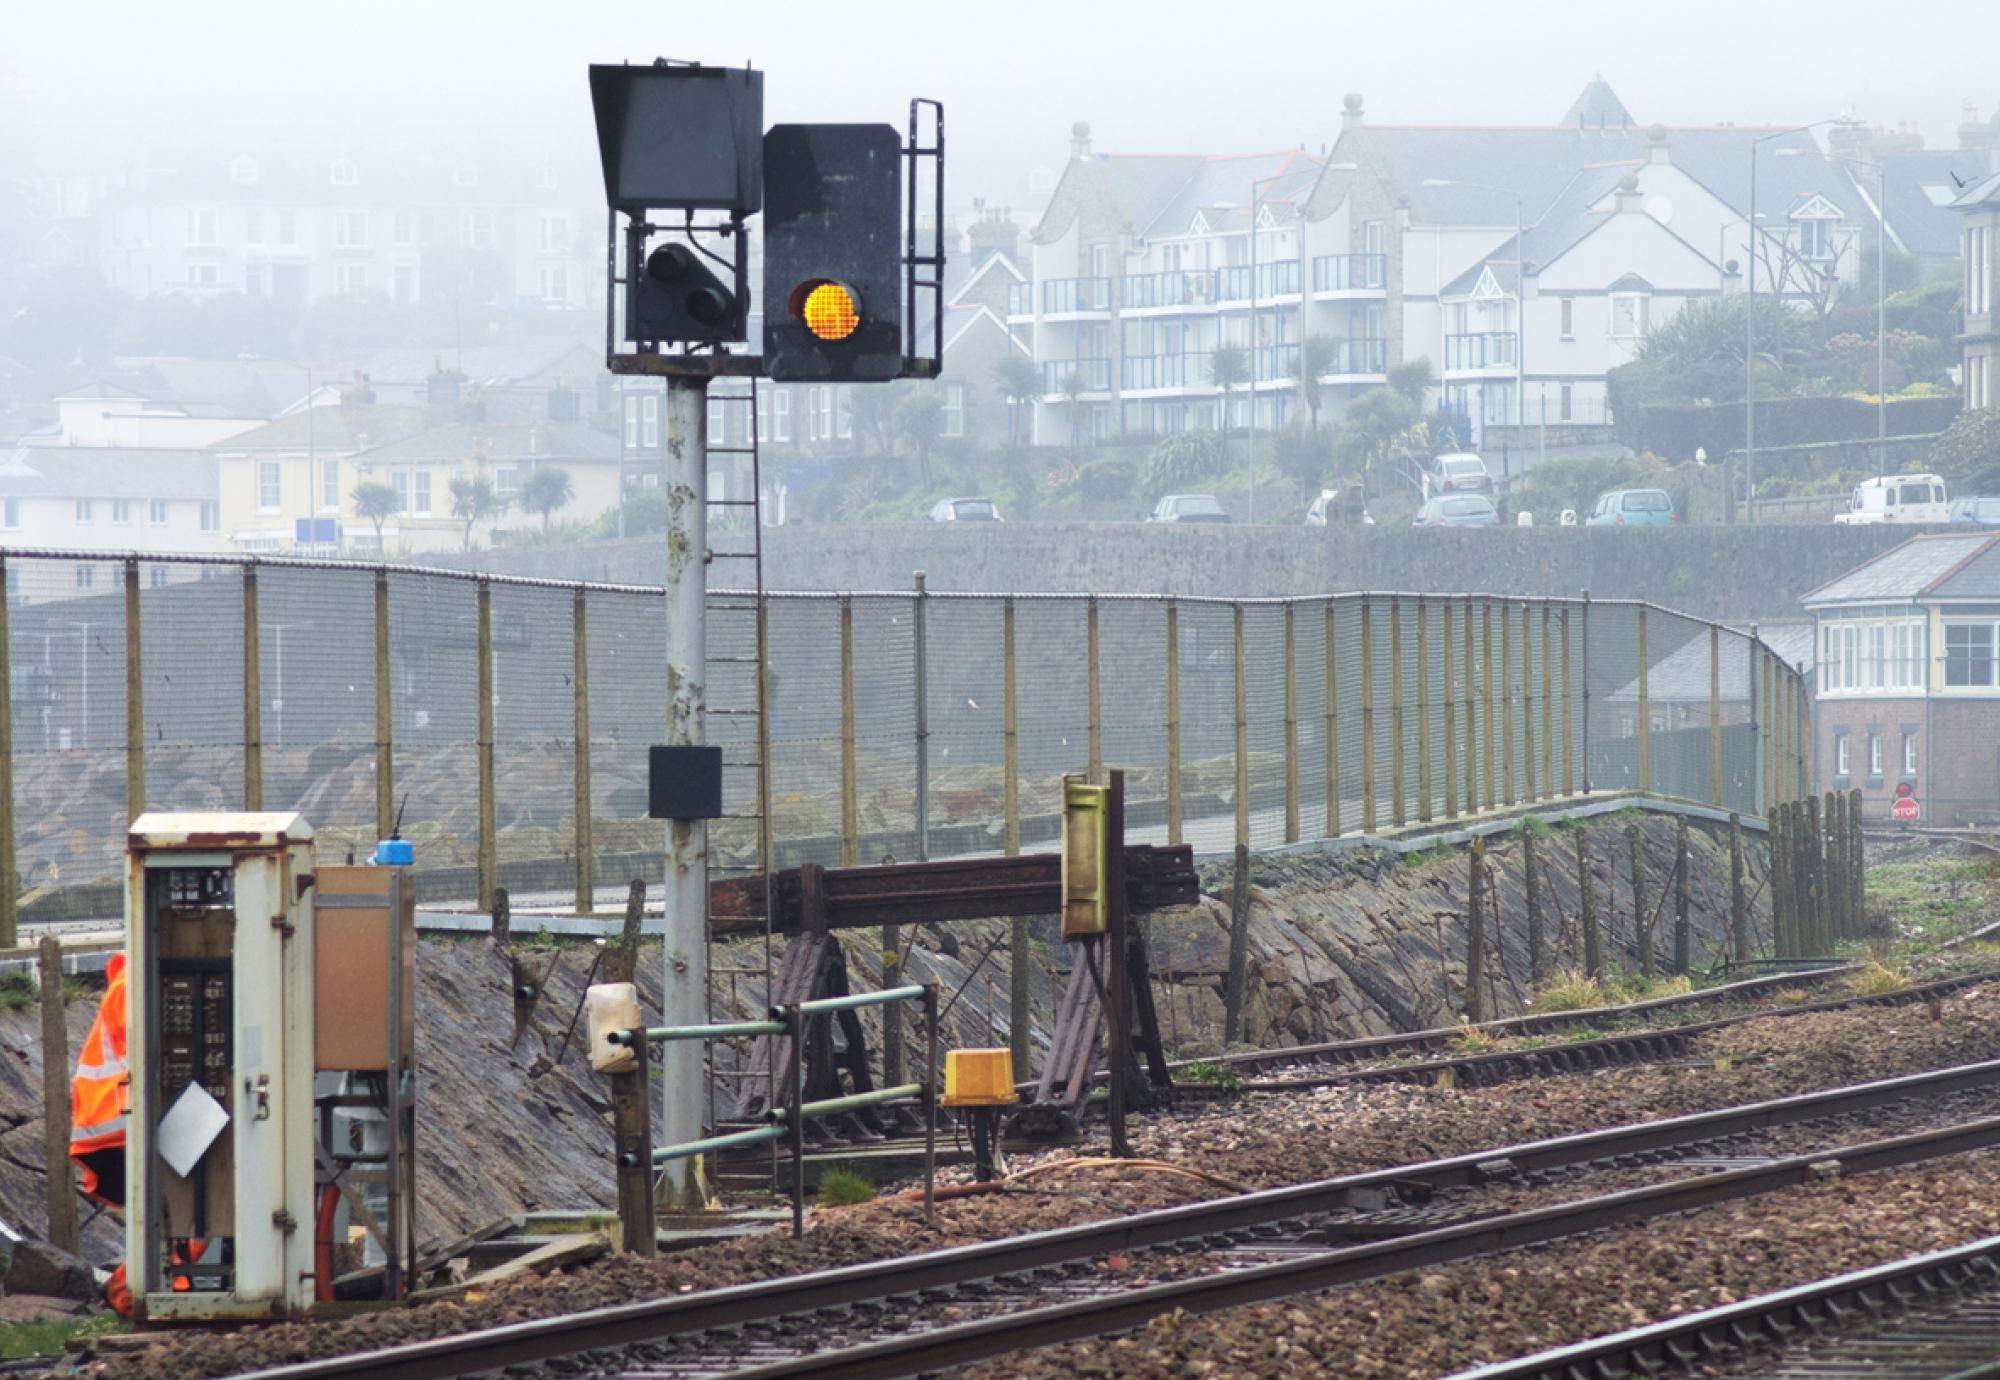 Maintenance being carried out on signalling equipment on the railway in Cornwall